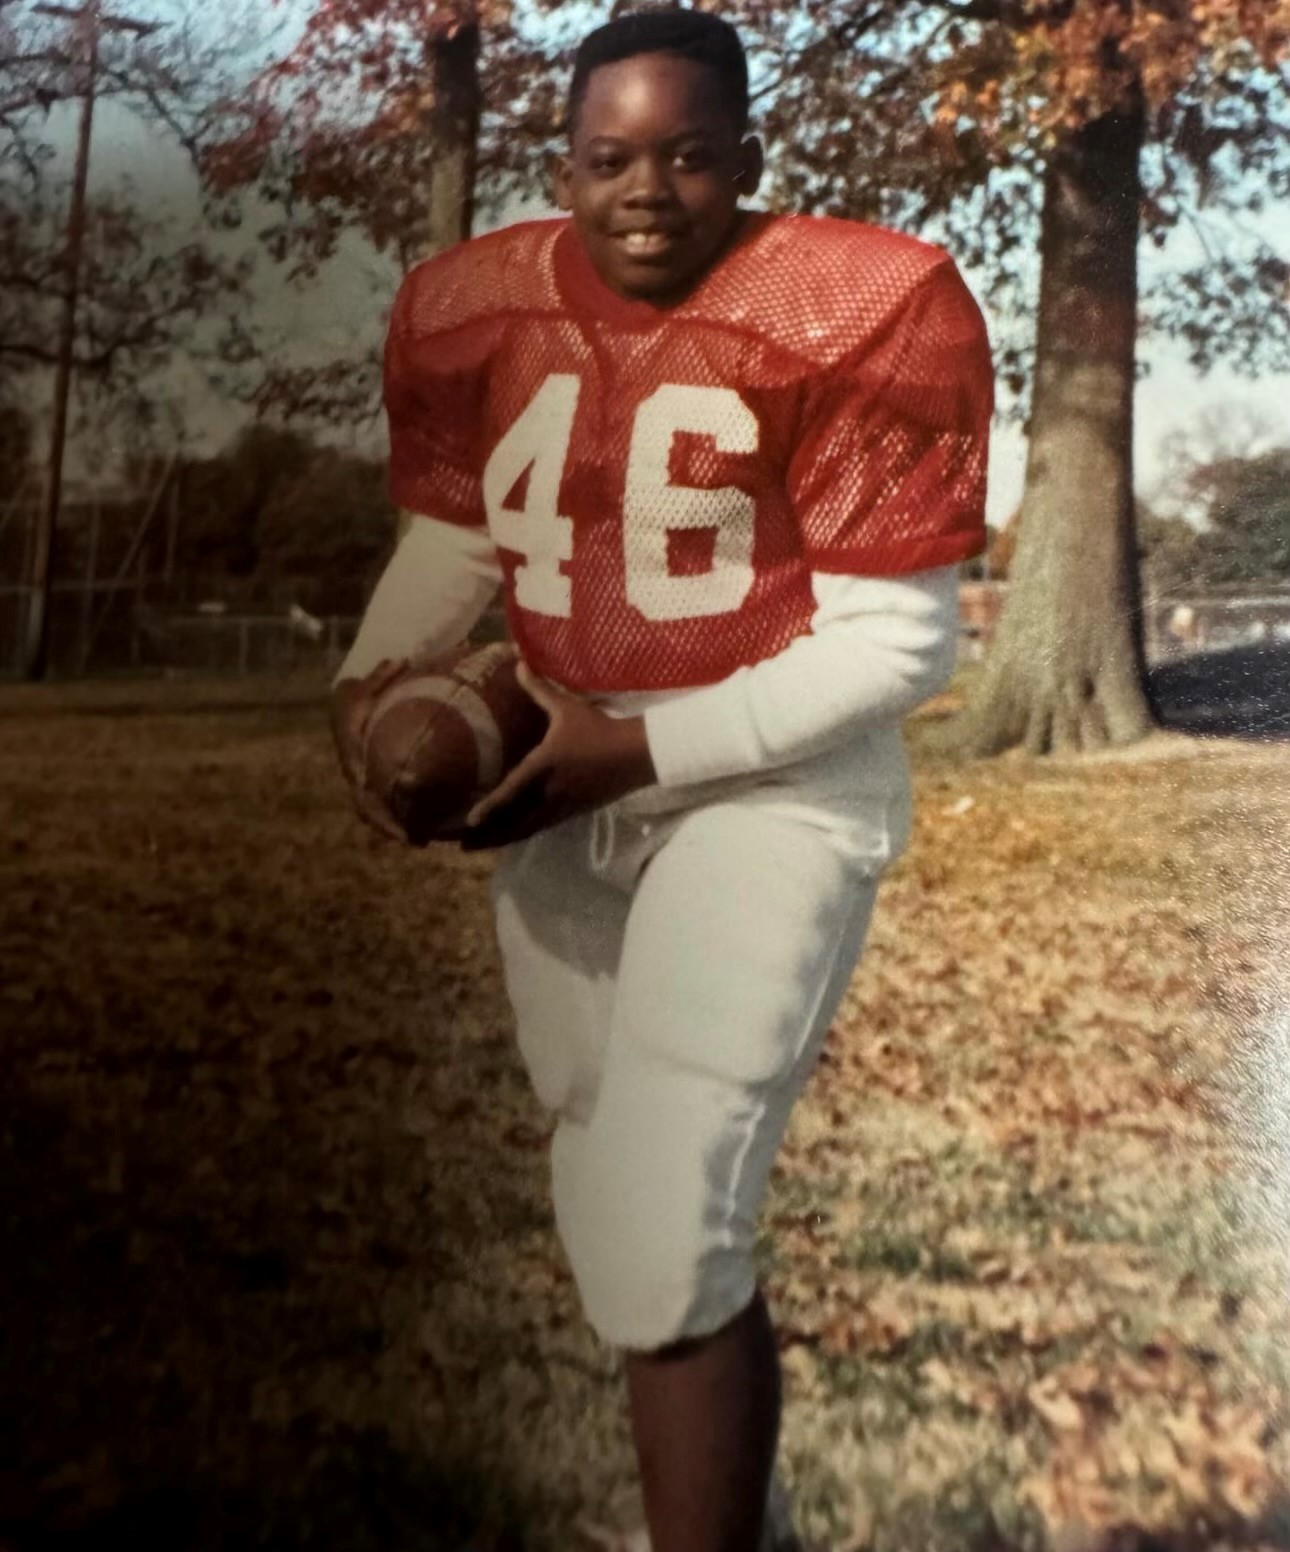 Corey Twine as a young child in a football uniform.  